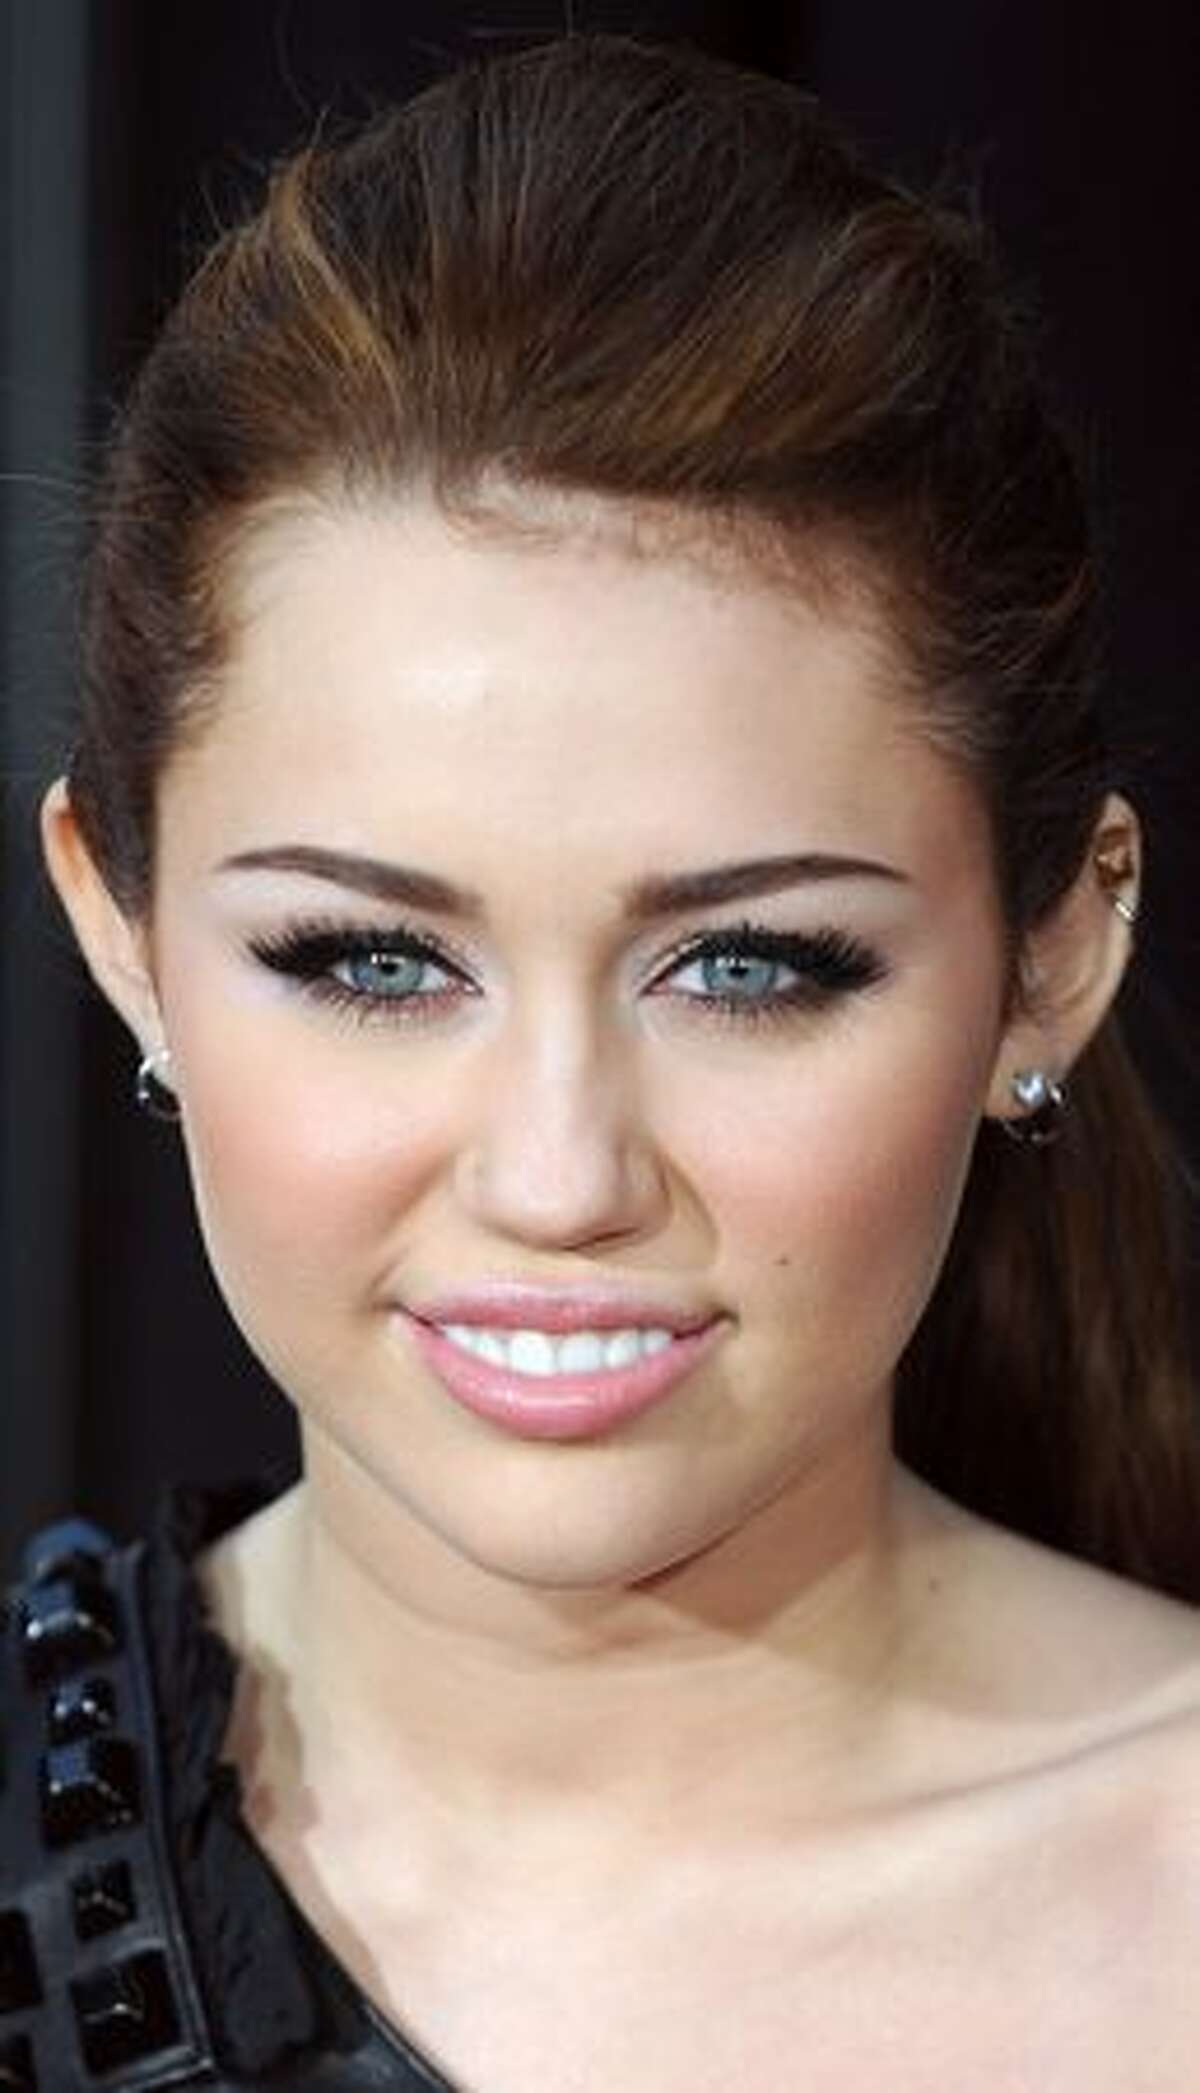 Actress and singer Miley Cyrus arrives for the premiere of "The Last Song" in Hollywood, California.